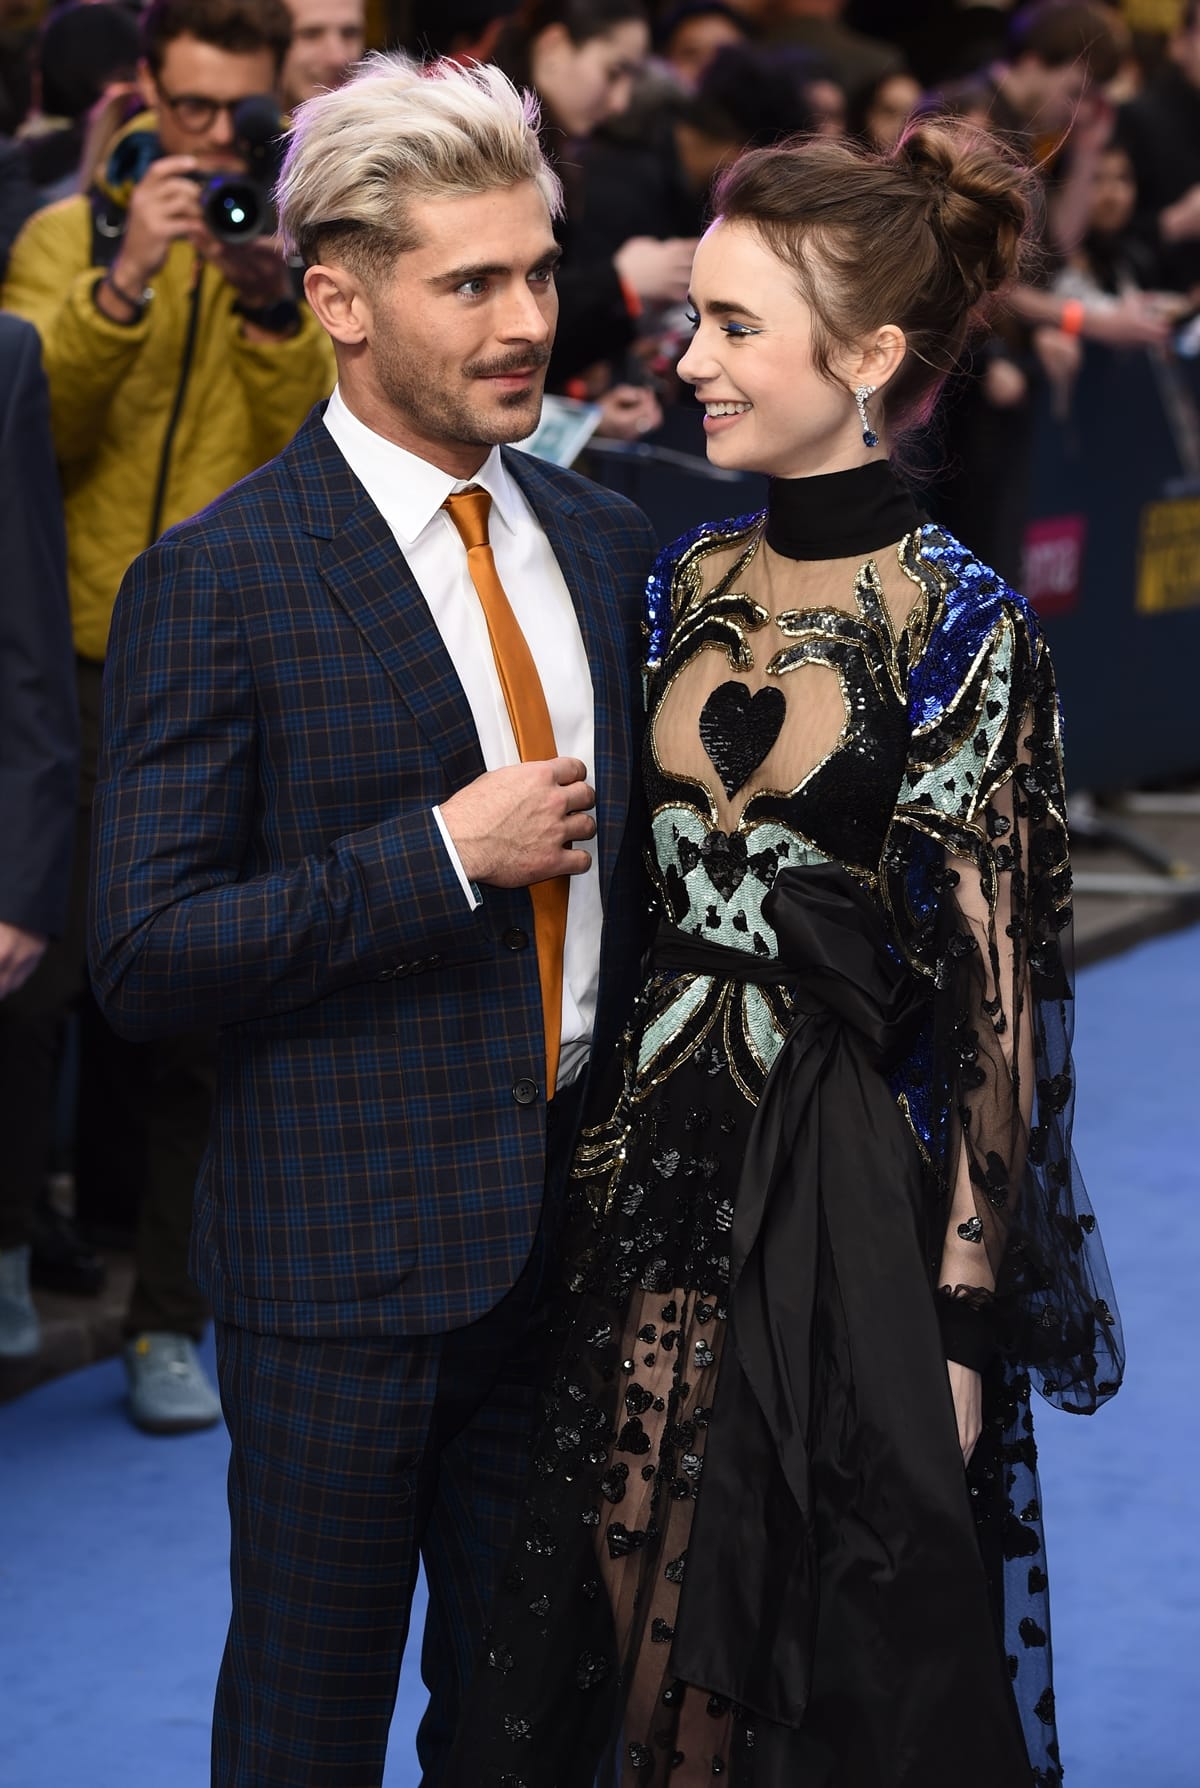 Zac Efron is 4 inches taller than Lily Collins, with a height of 5ft 8 (172.7 cm) compared to Lily's 5ft 4 (162.6 cm)